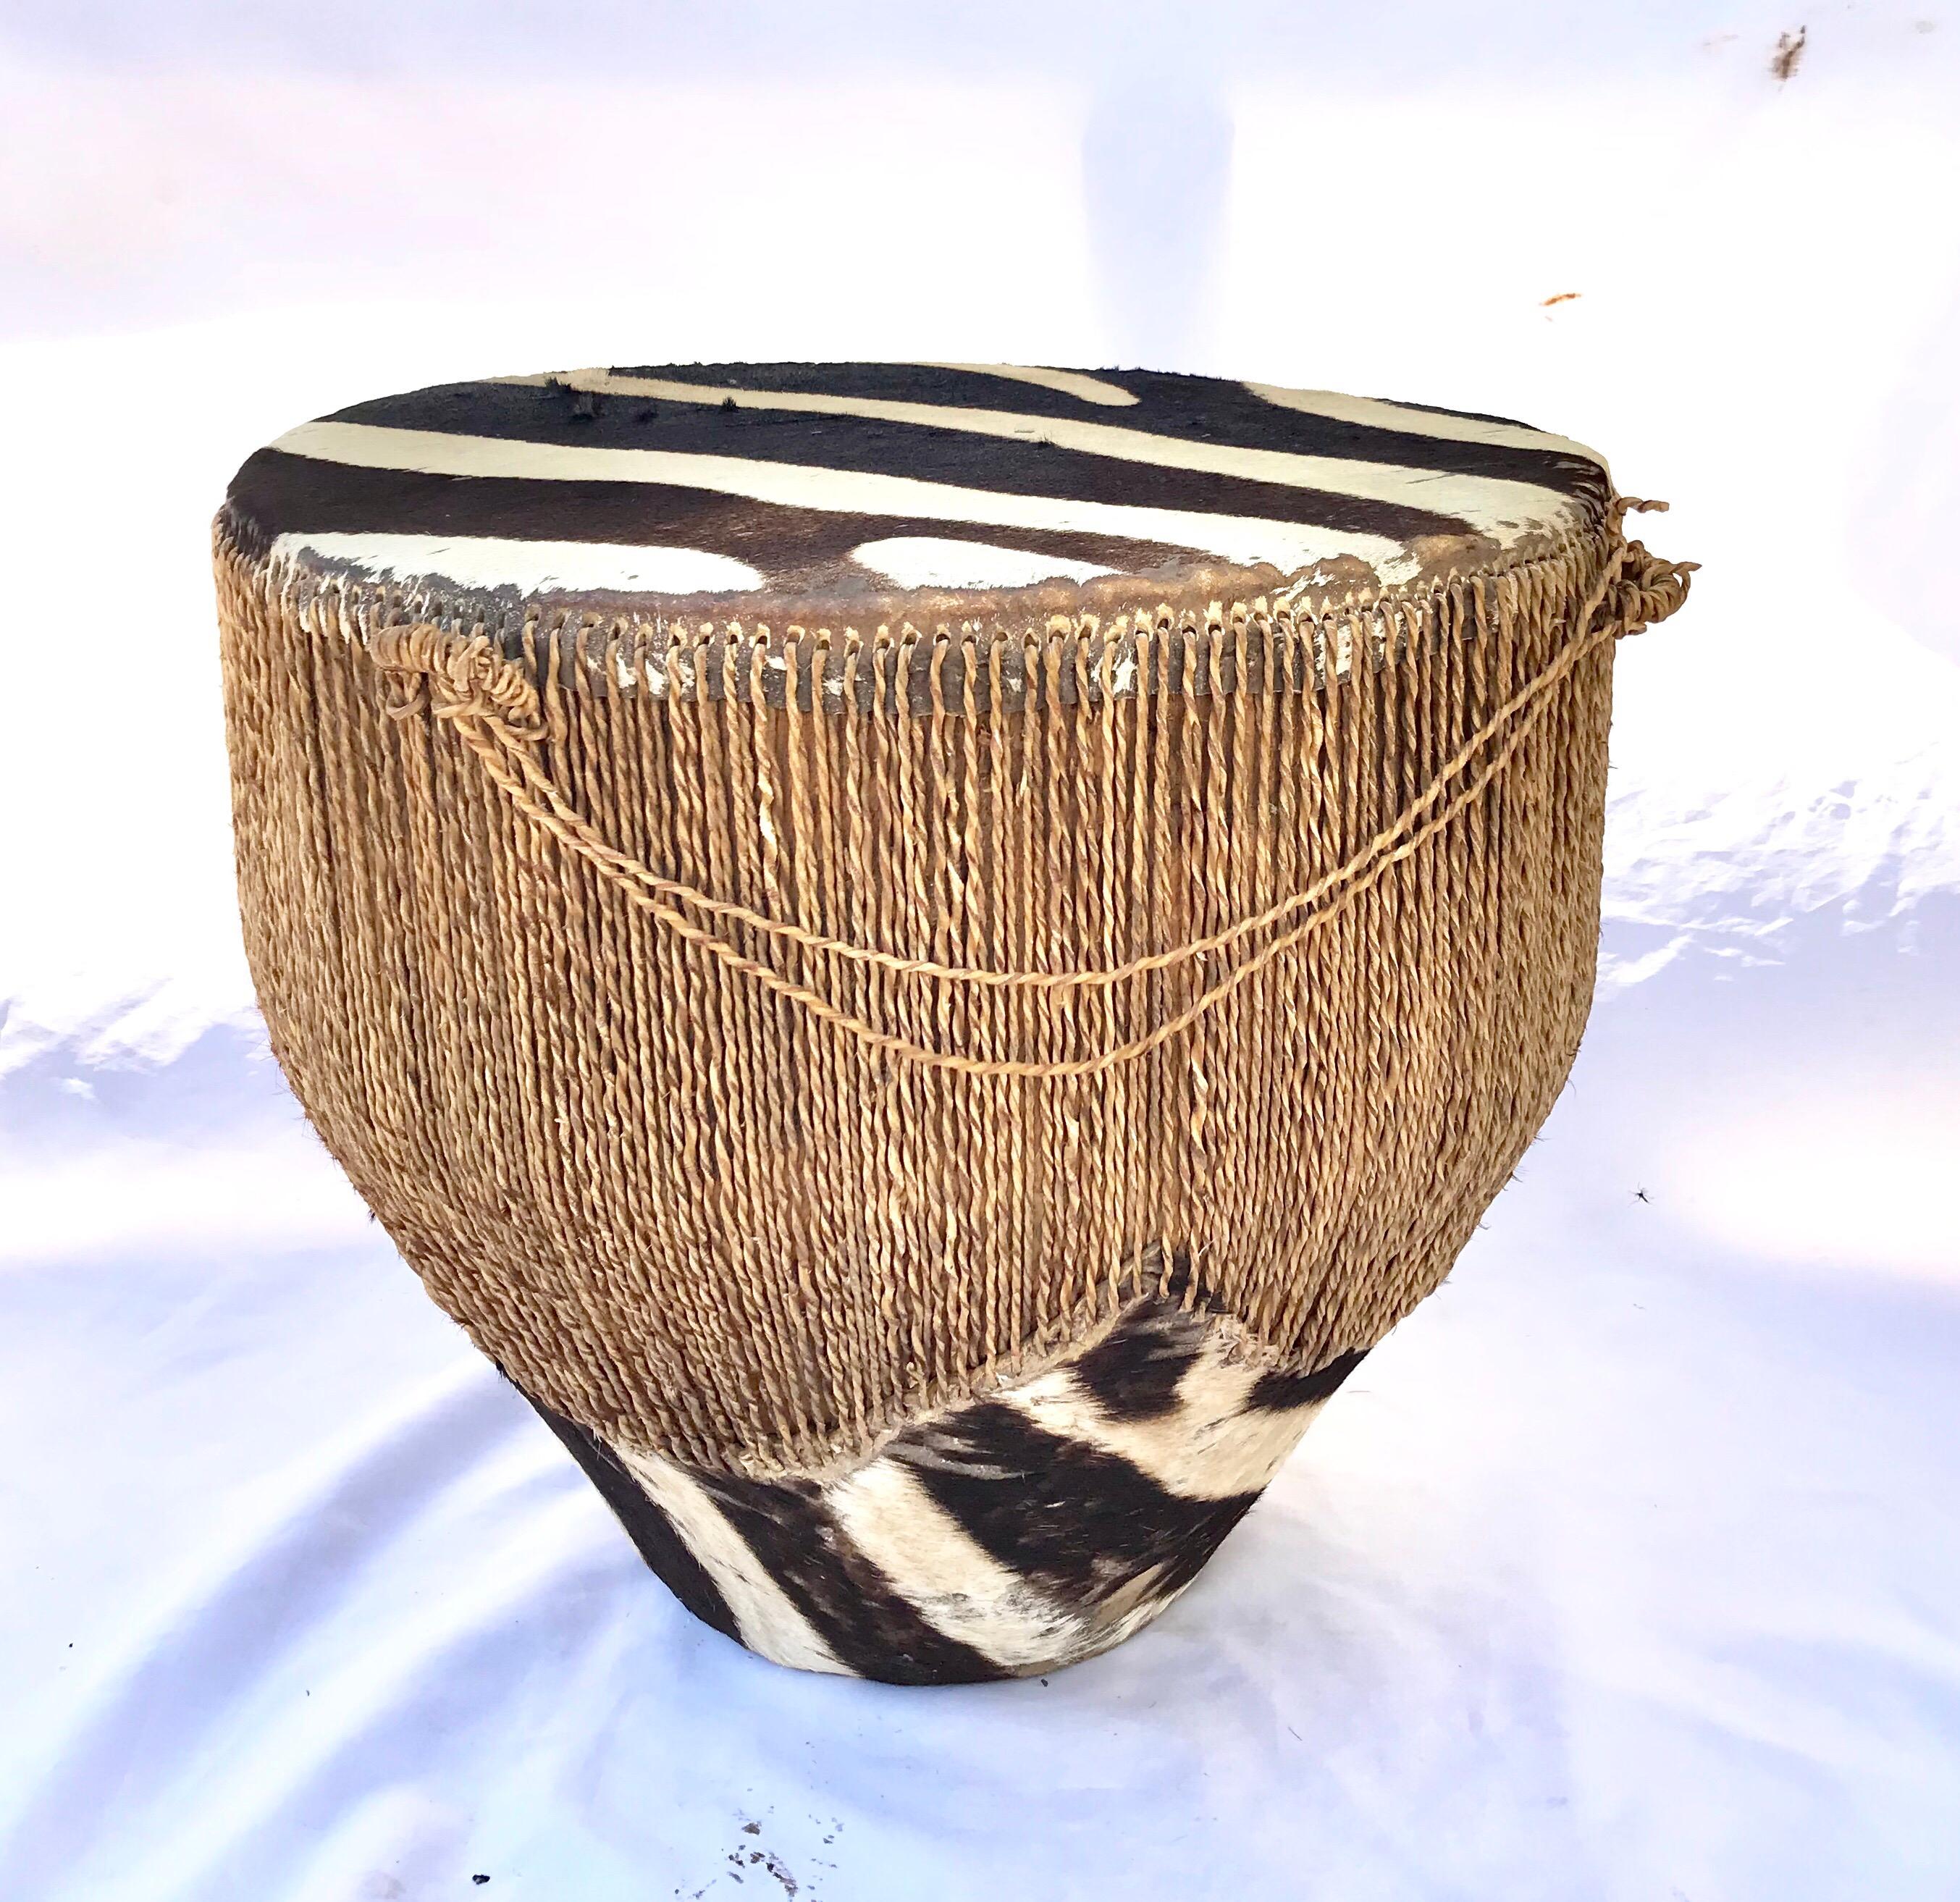 A spectacular vintage drum side table in zebra hide. A necessity for the global boho-chic curated life.